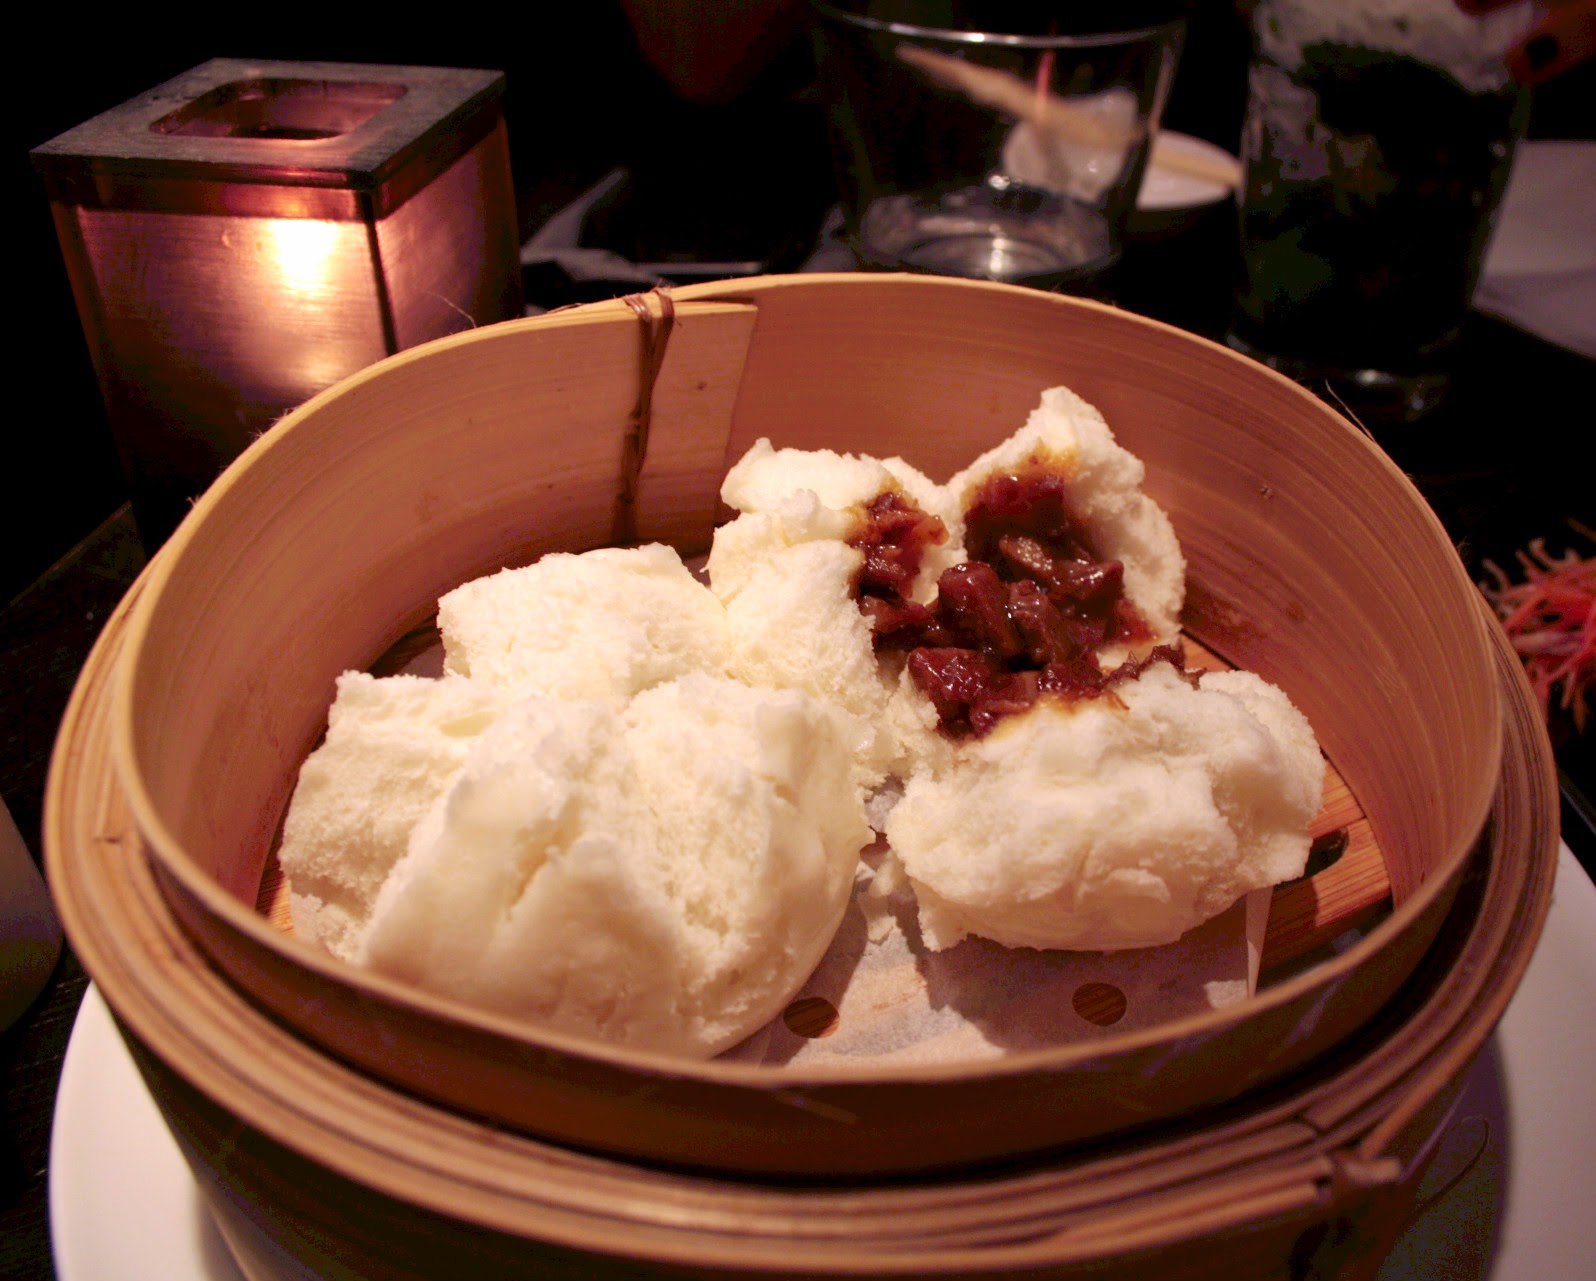 Char sui bao from Ping Pong dim sum restaurant in Soho